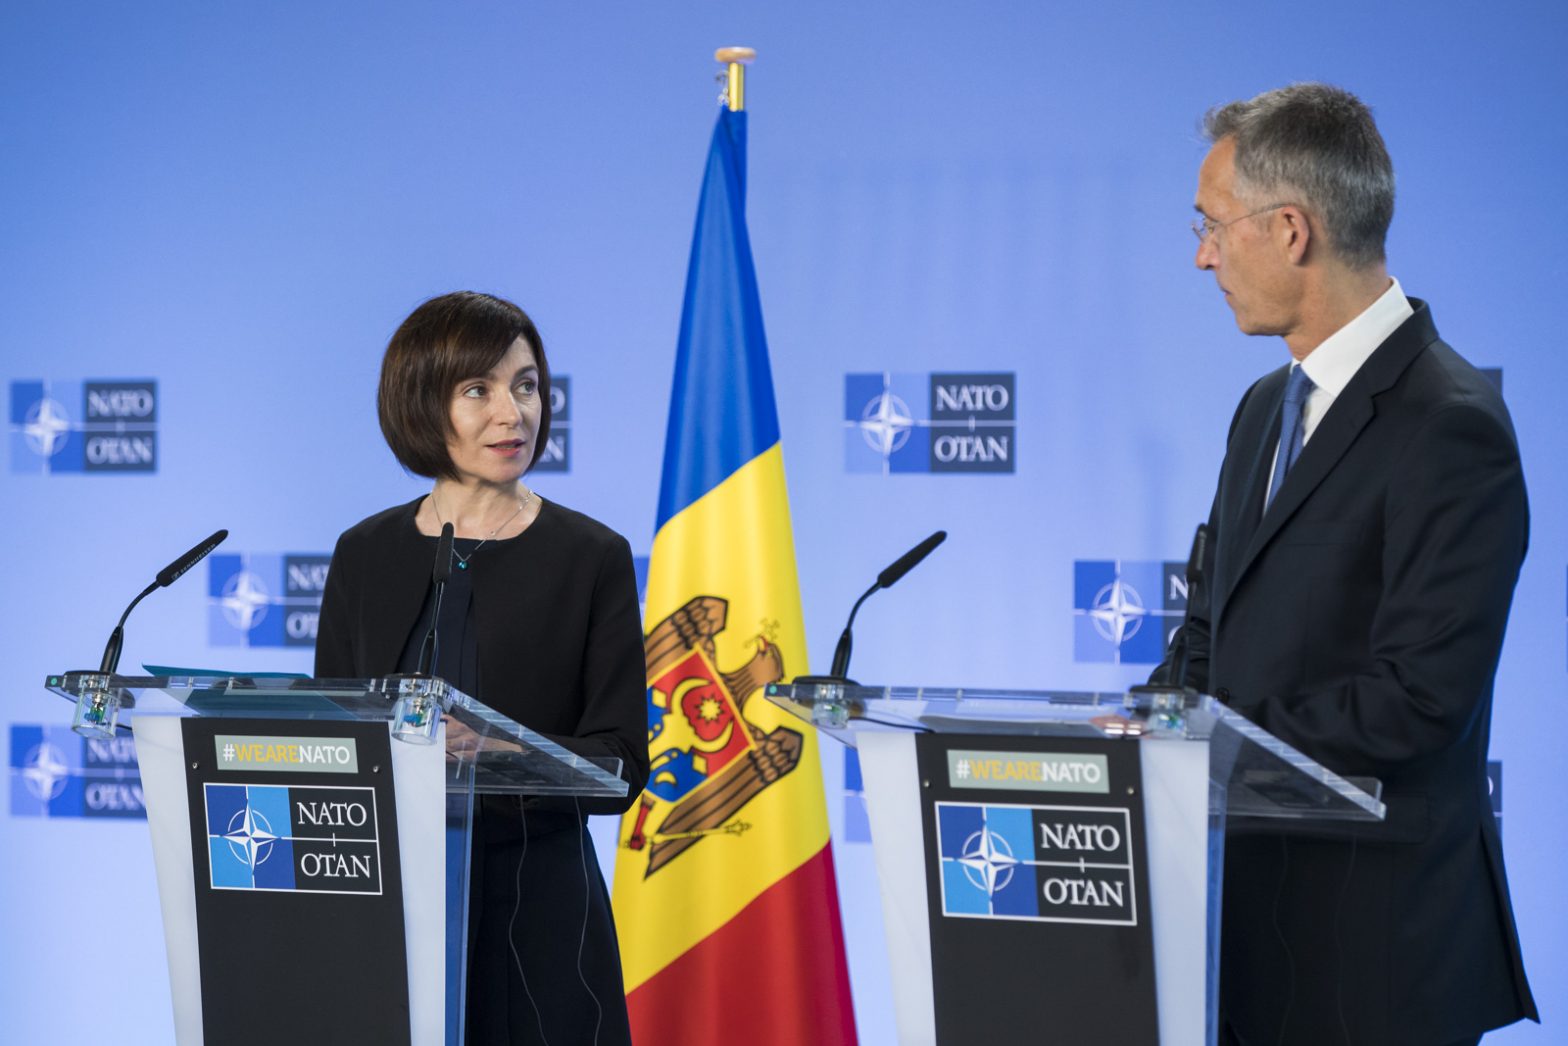 The Geopolitical Tensions in Moldova: A Pawn in the Ukraine Conflict?